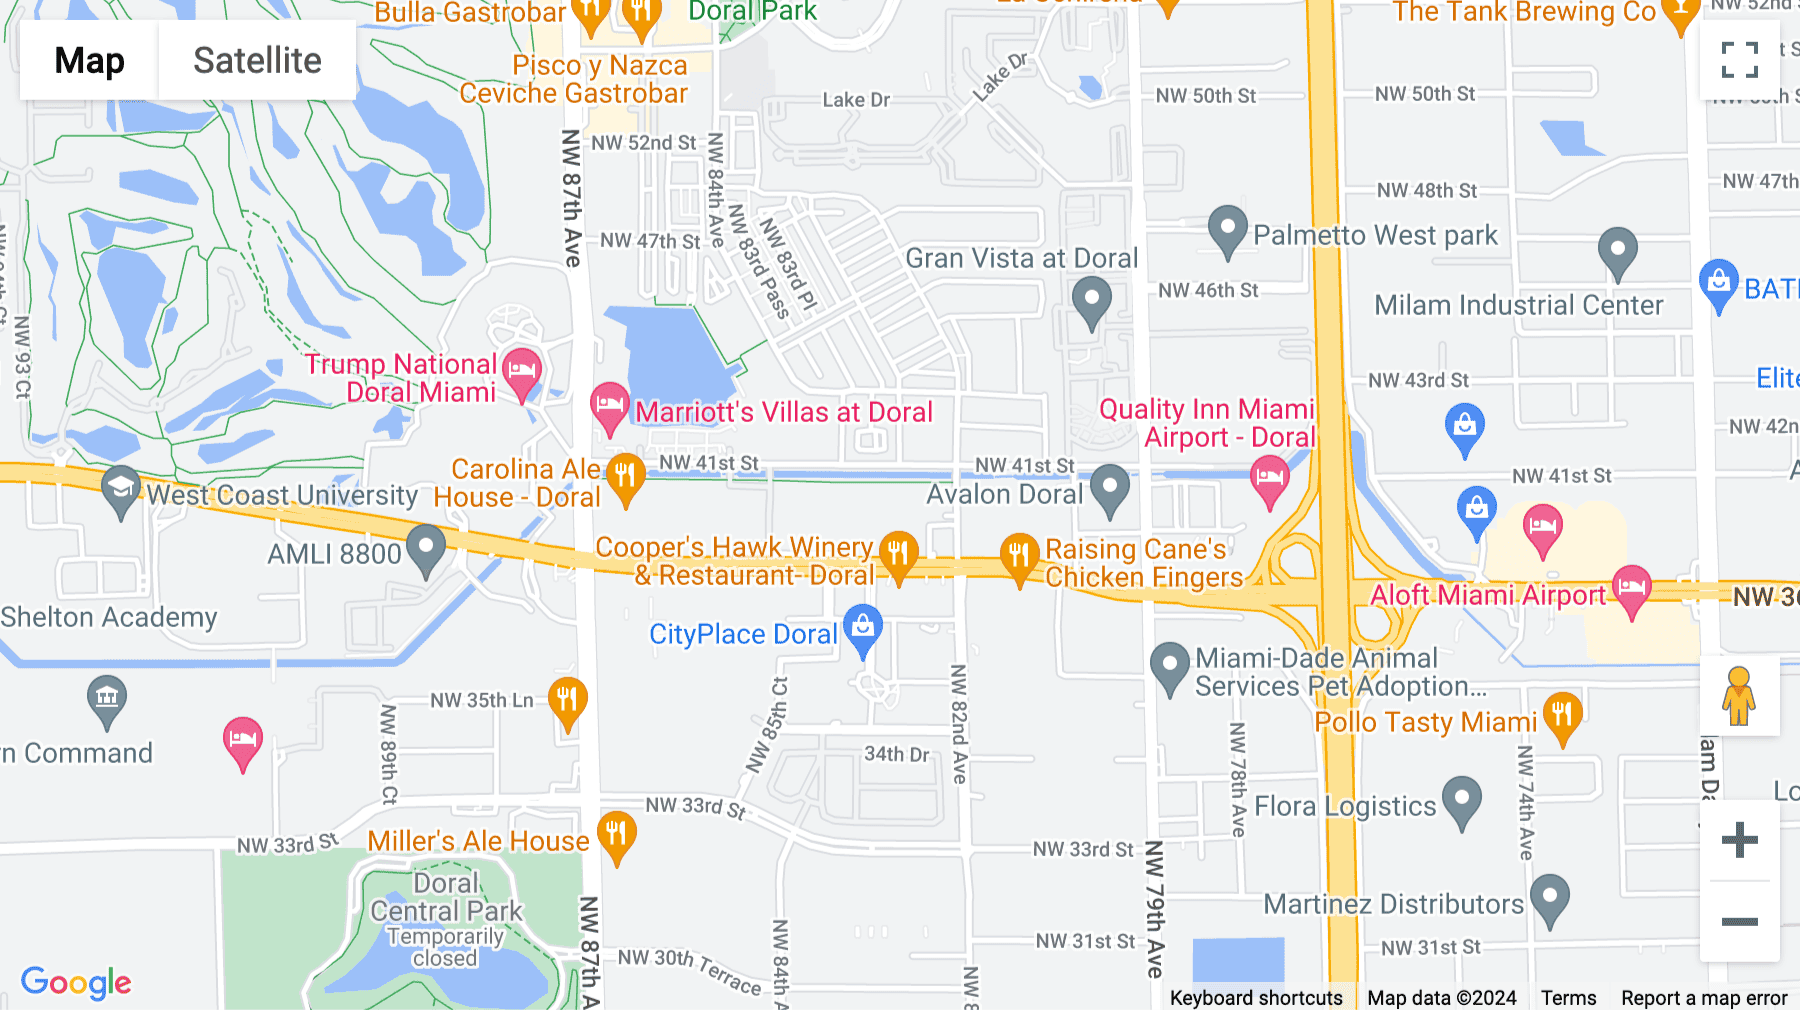 Click for interative map of 8200 NW 41st Street, Doral, Florida, USA, Doral